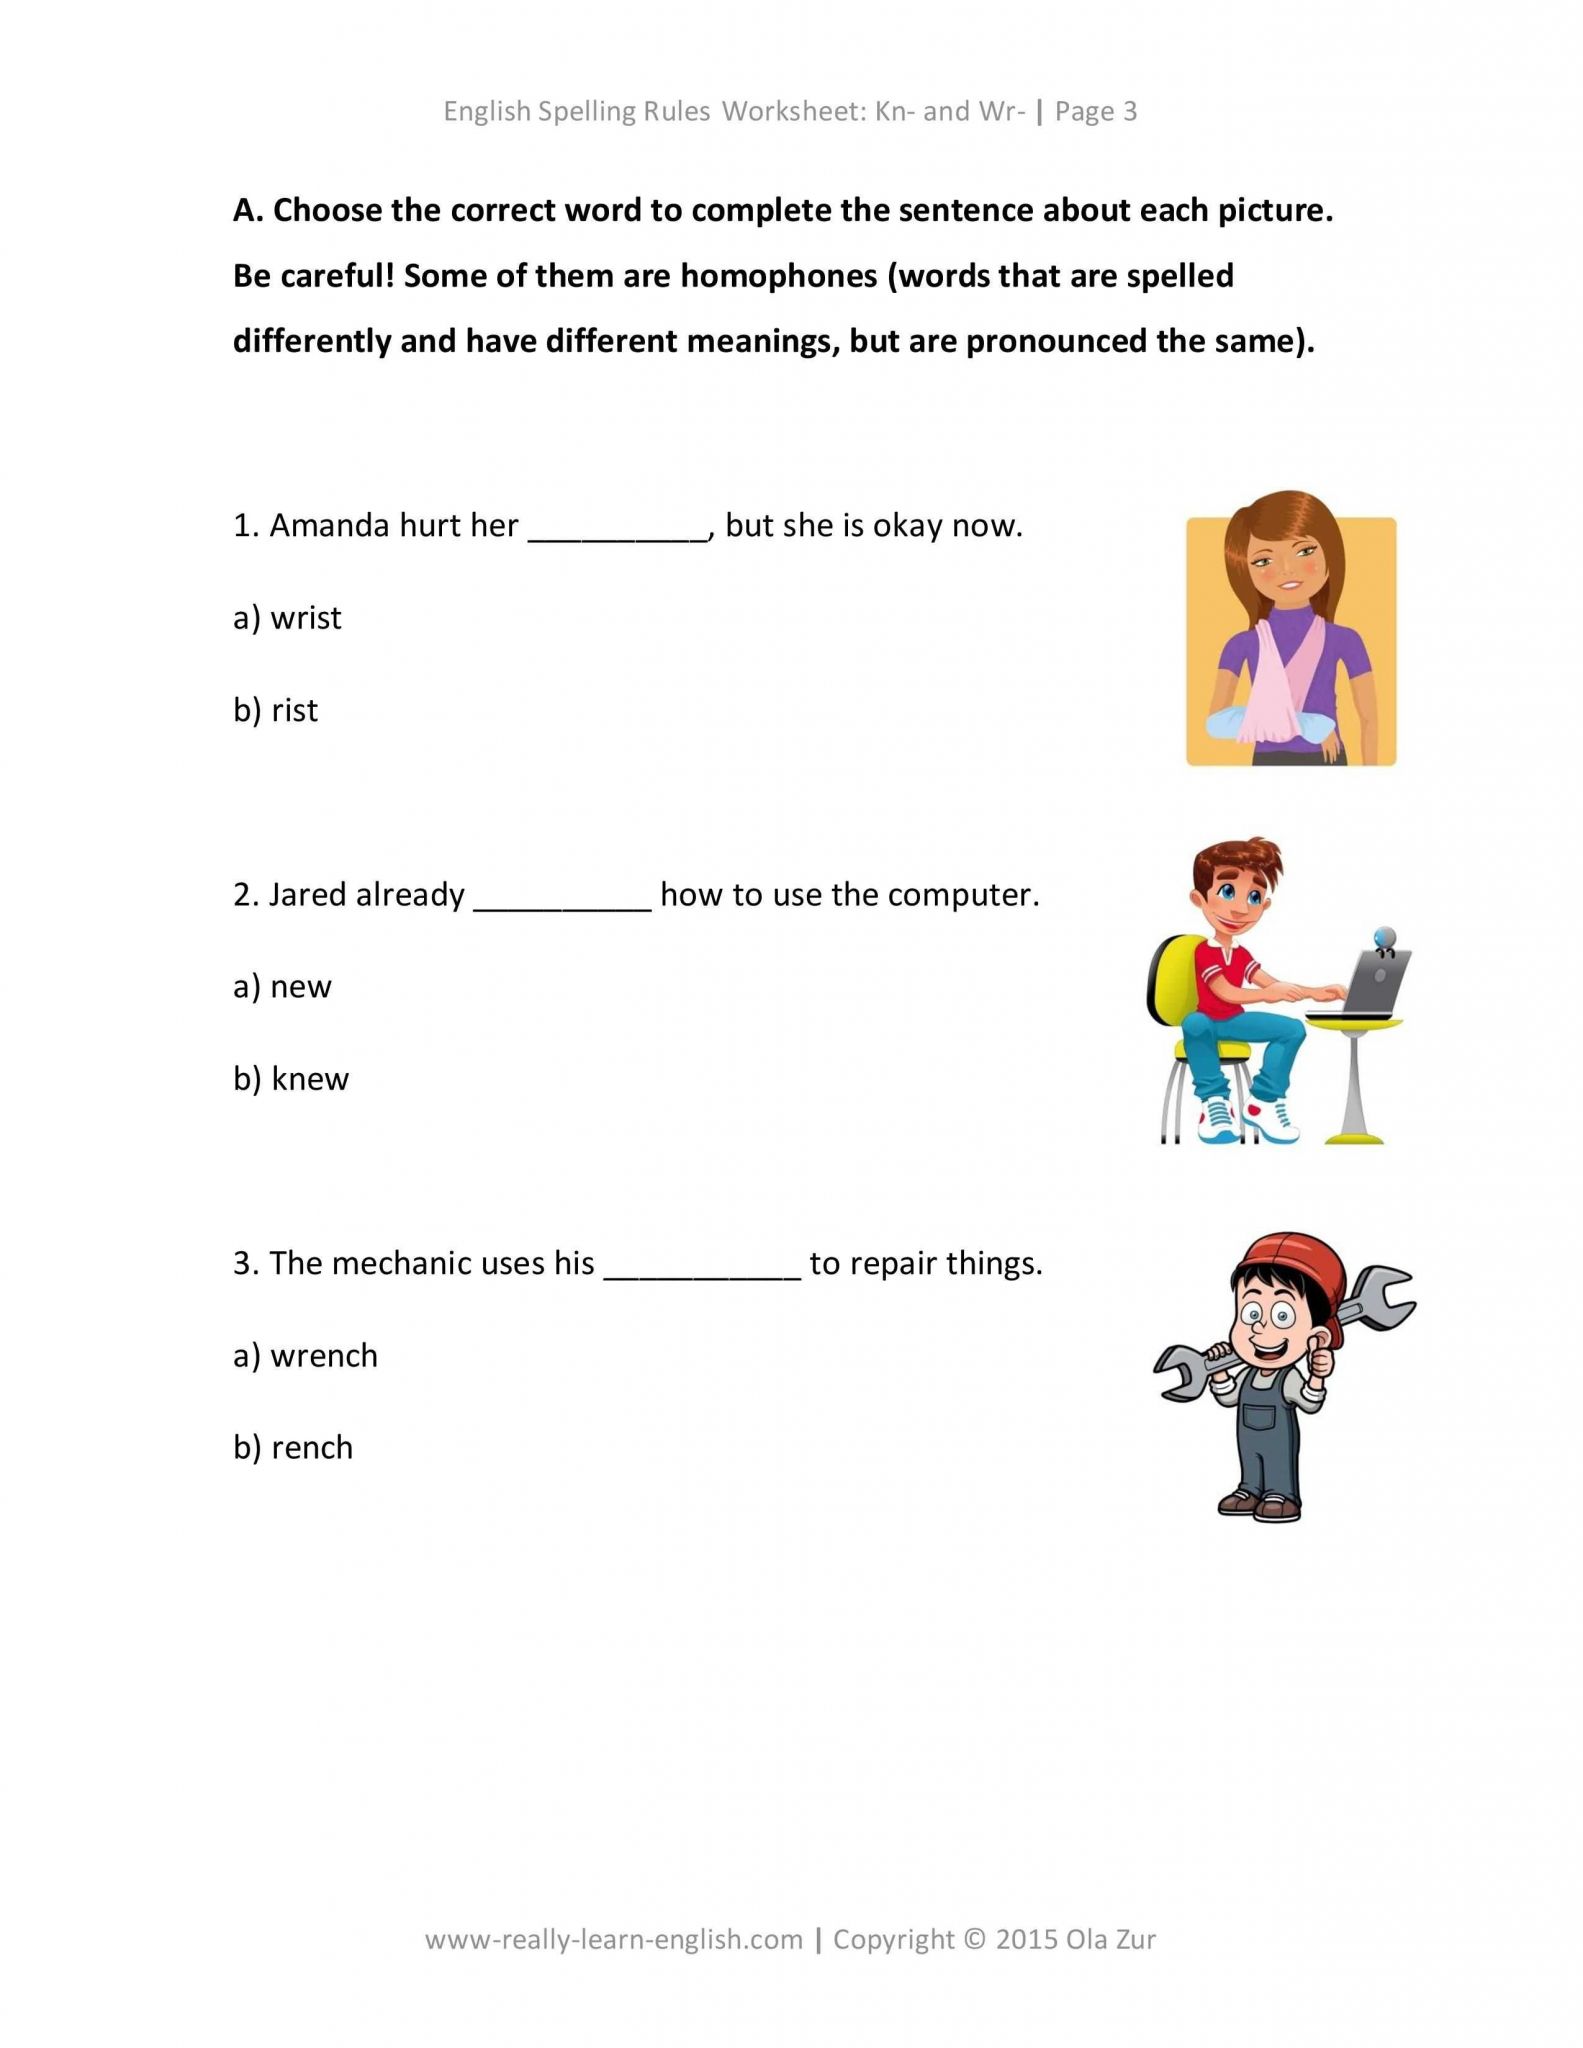 Special Right Triangles Worksheet Answer Key with Work together with the Plete List Of English Spelling Rules Lesson 3 Kn and Wr